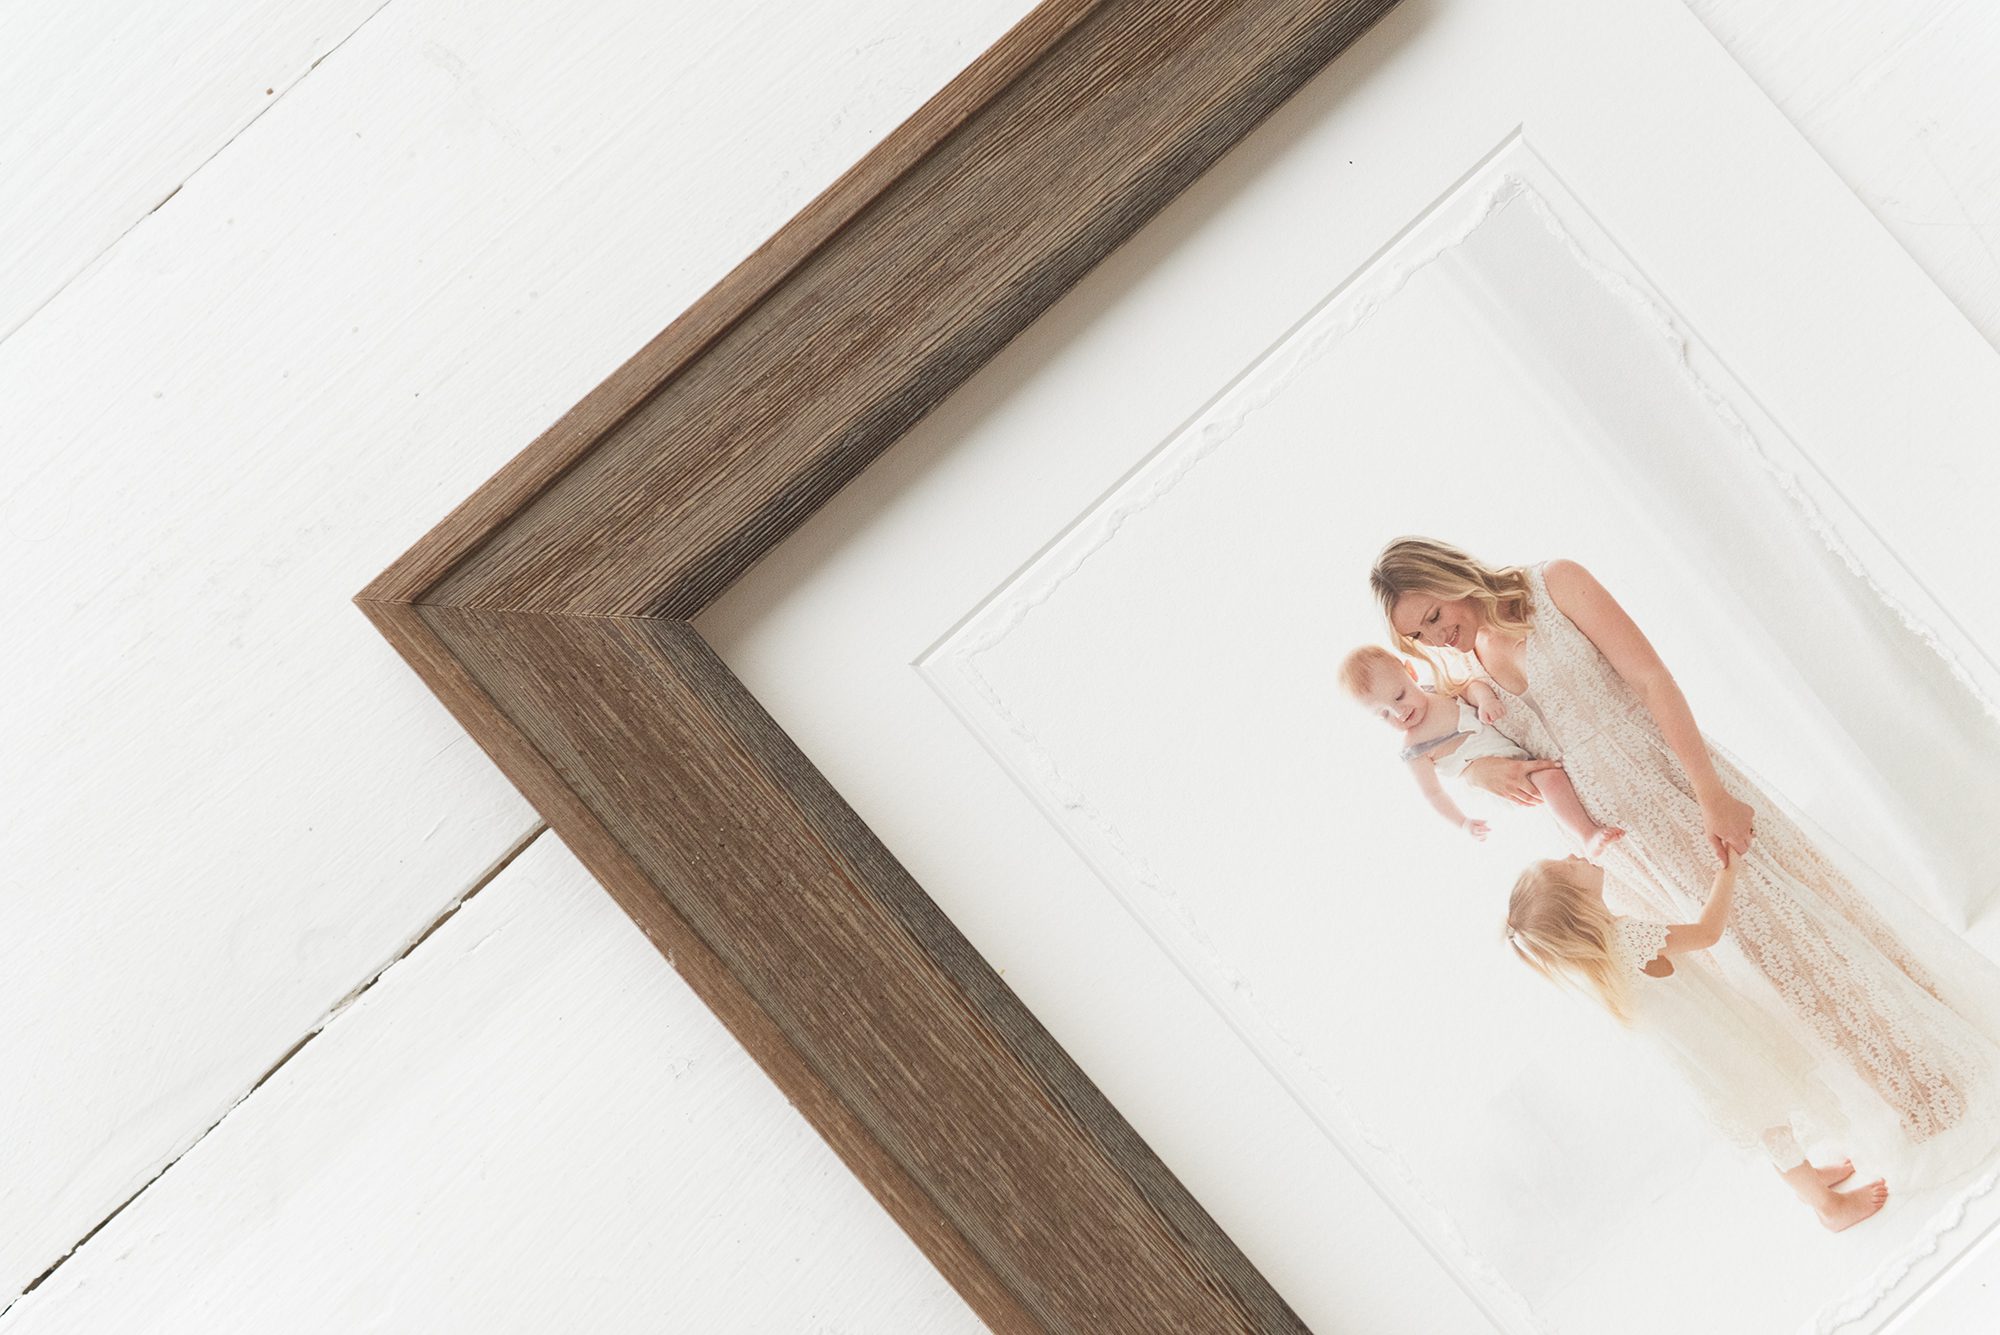 Deckled print with barnwood frame | Reaj Roberts Photography